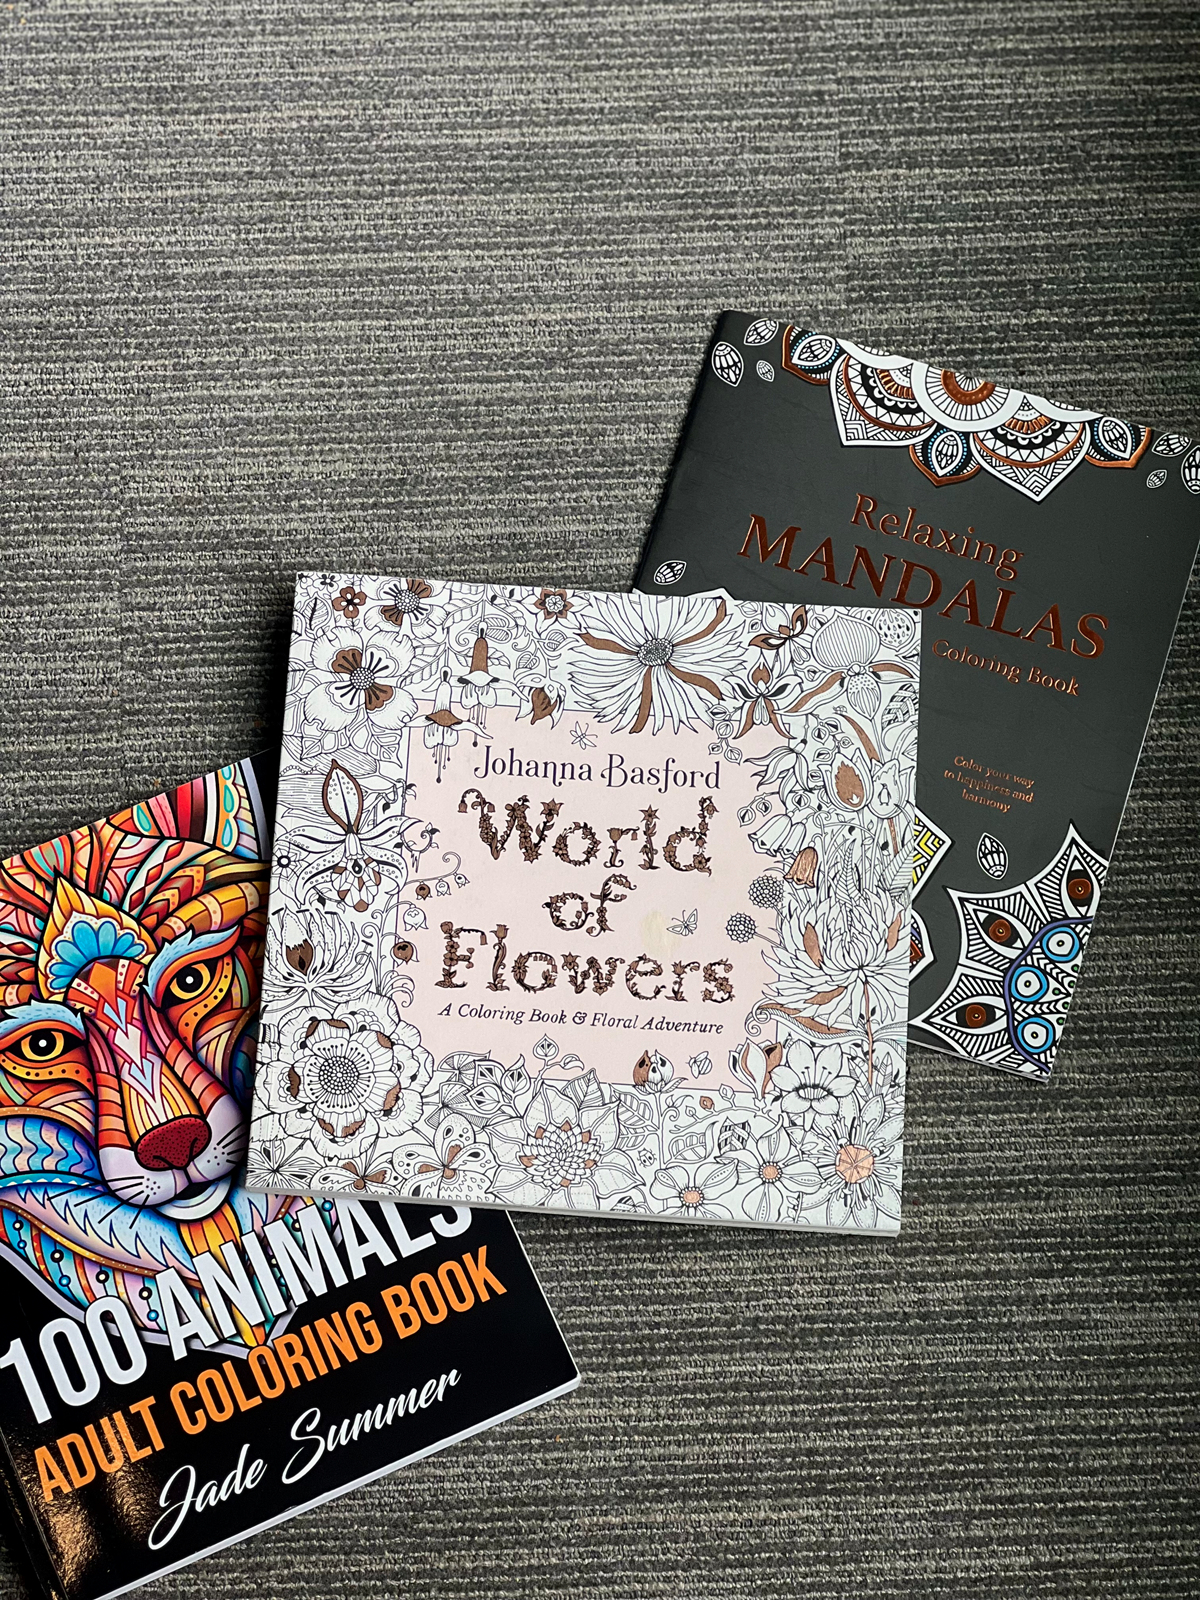 World of Flowers, Relaxing Mandalas, 100 Animals Adult Coloring Book (Coloring Books).